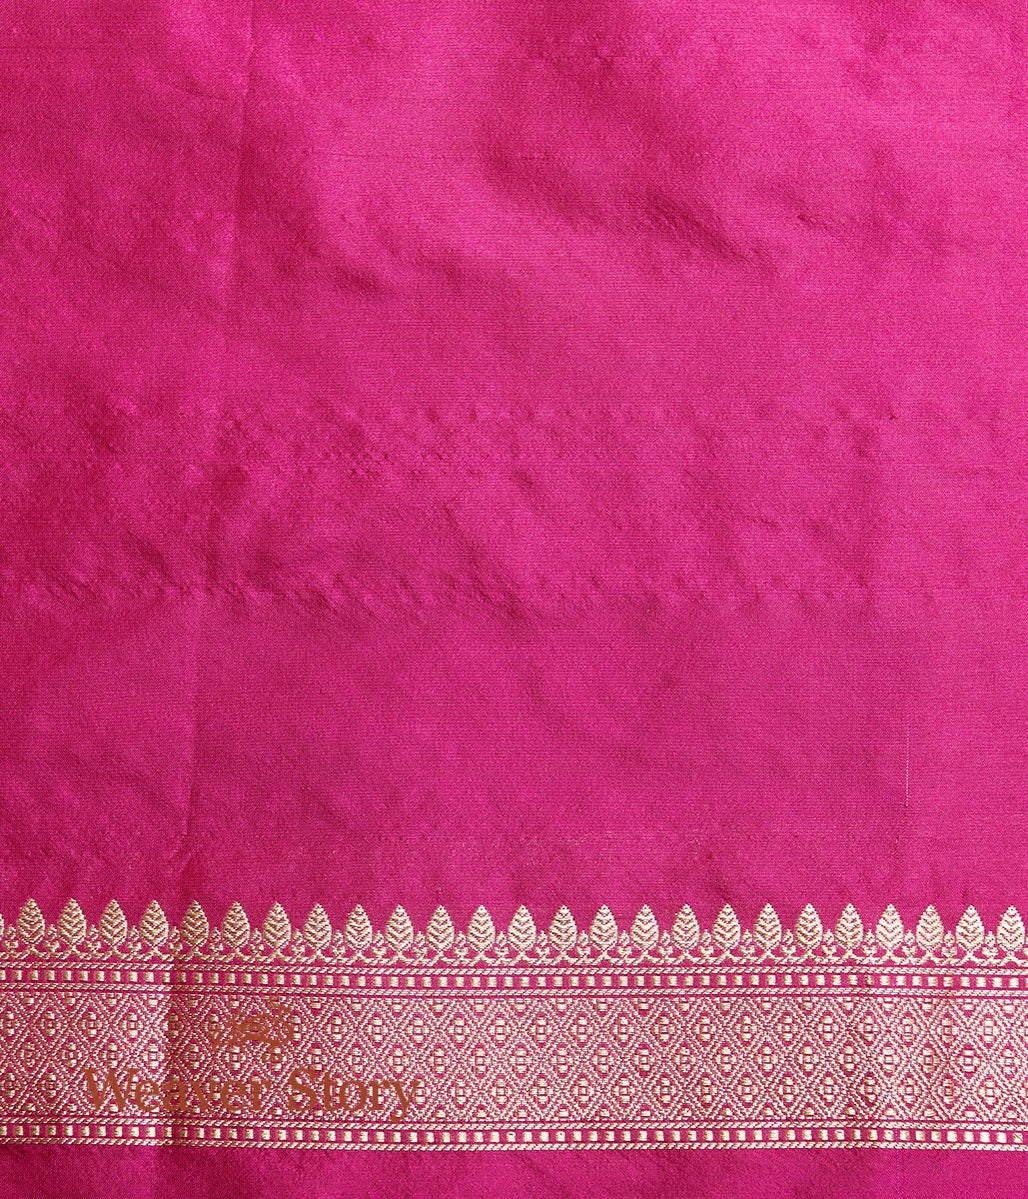 Handwoven_Pink_and_Orange_Tanchoi_with_Floral_Motifs_WeaverStory_05